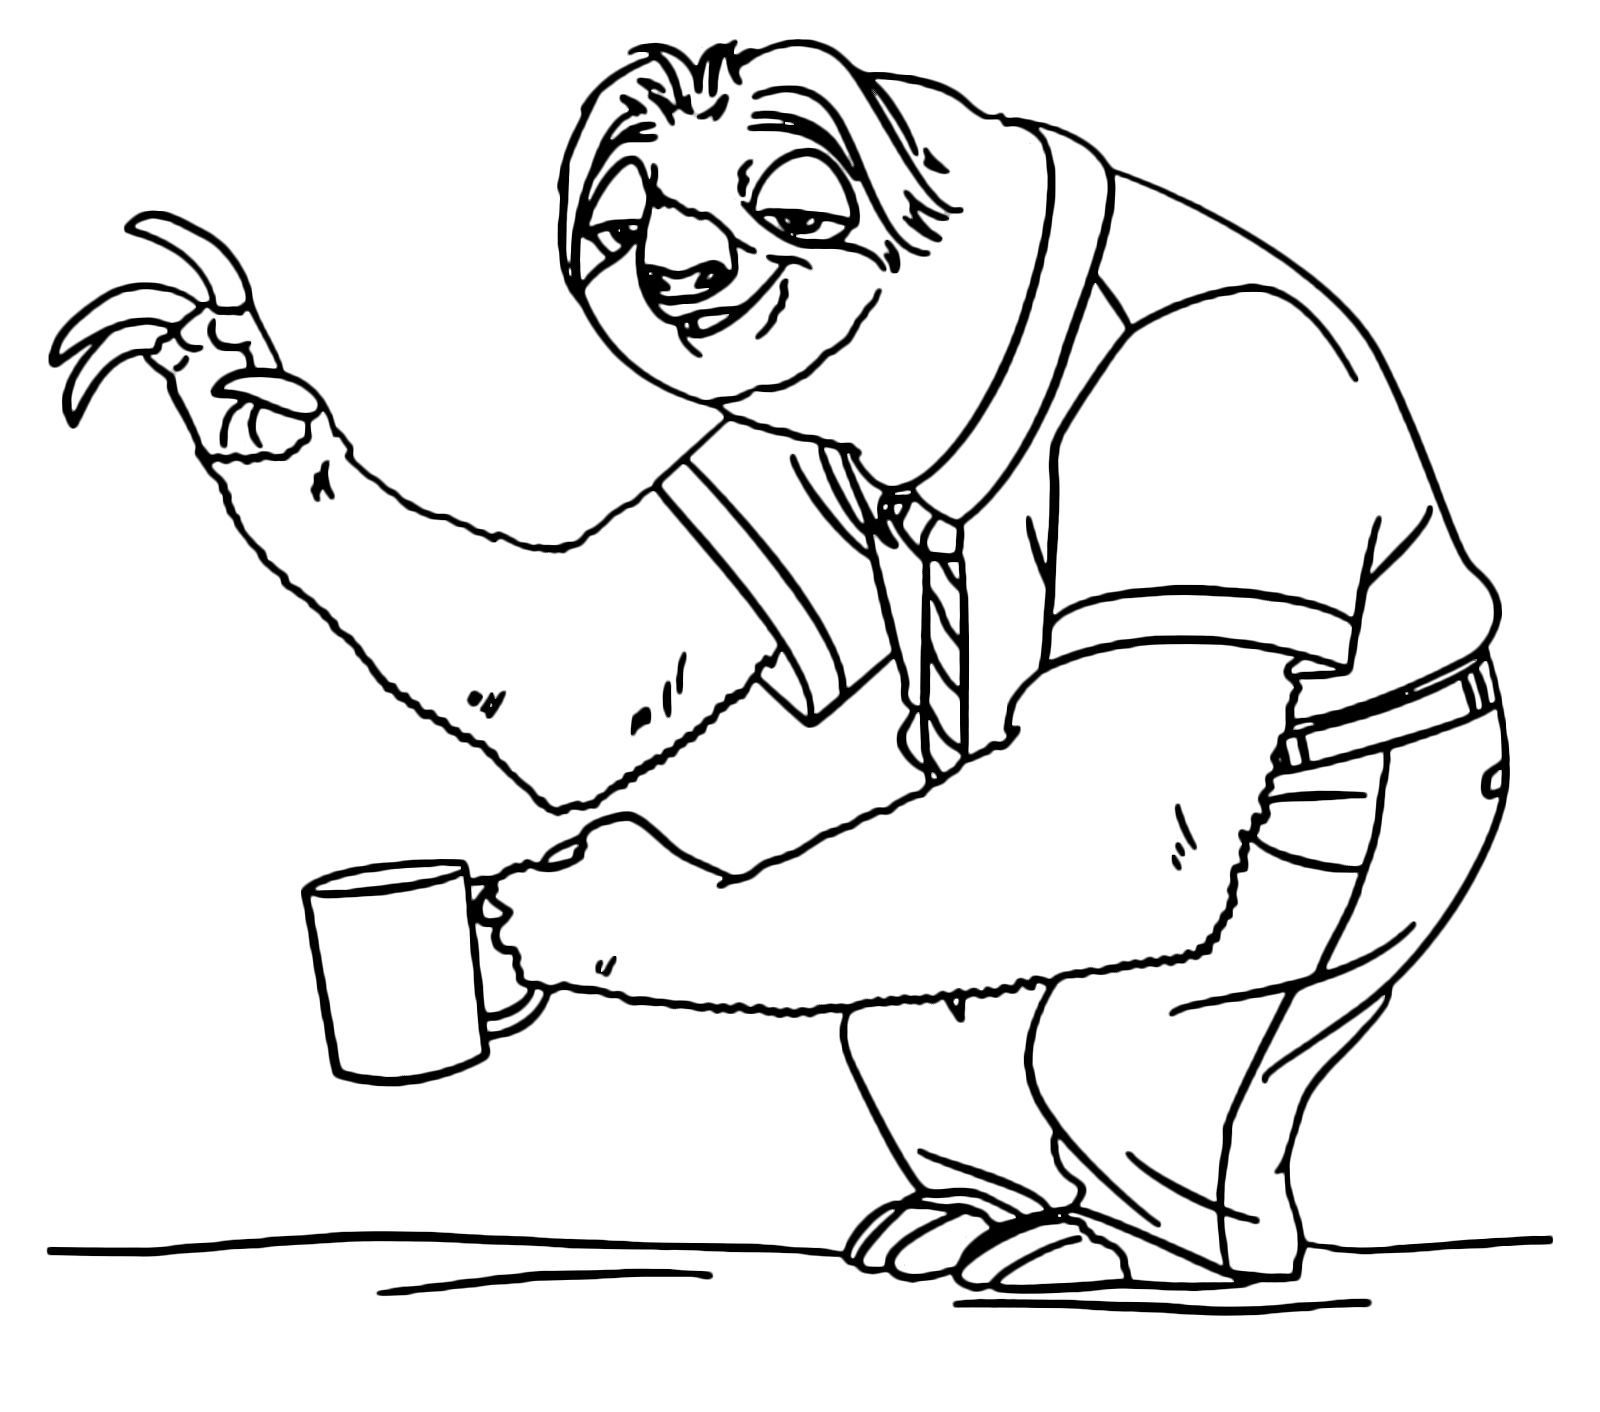 Flash Slothmore 拿着杯子打招呼 Coloring Page